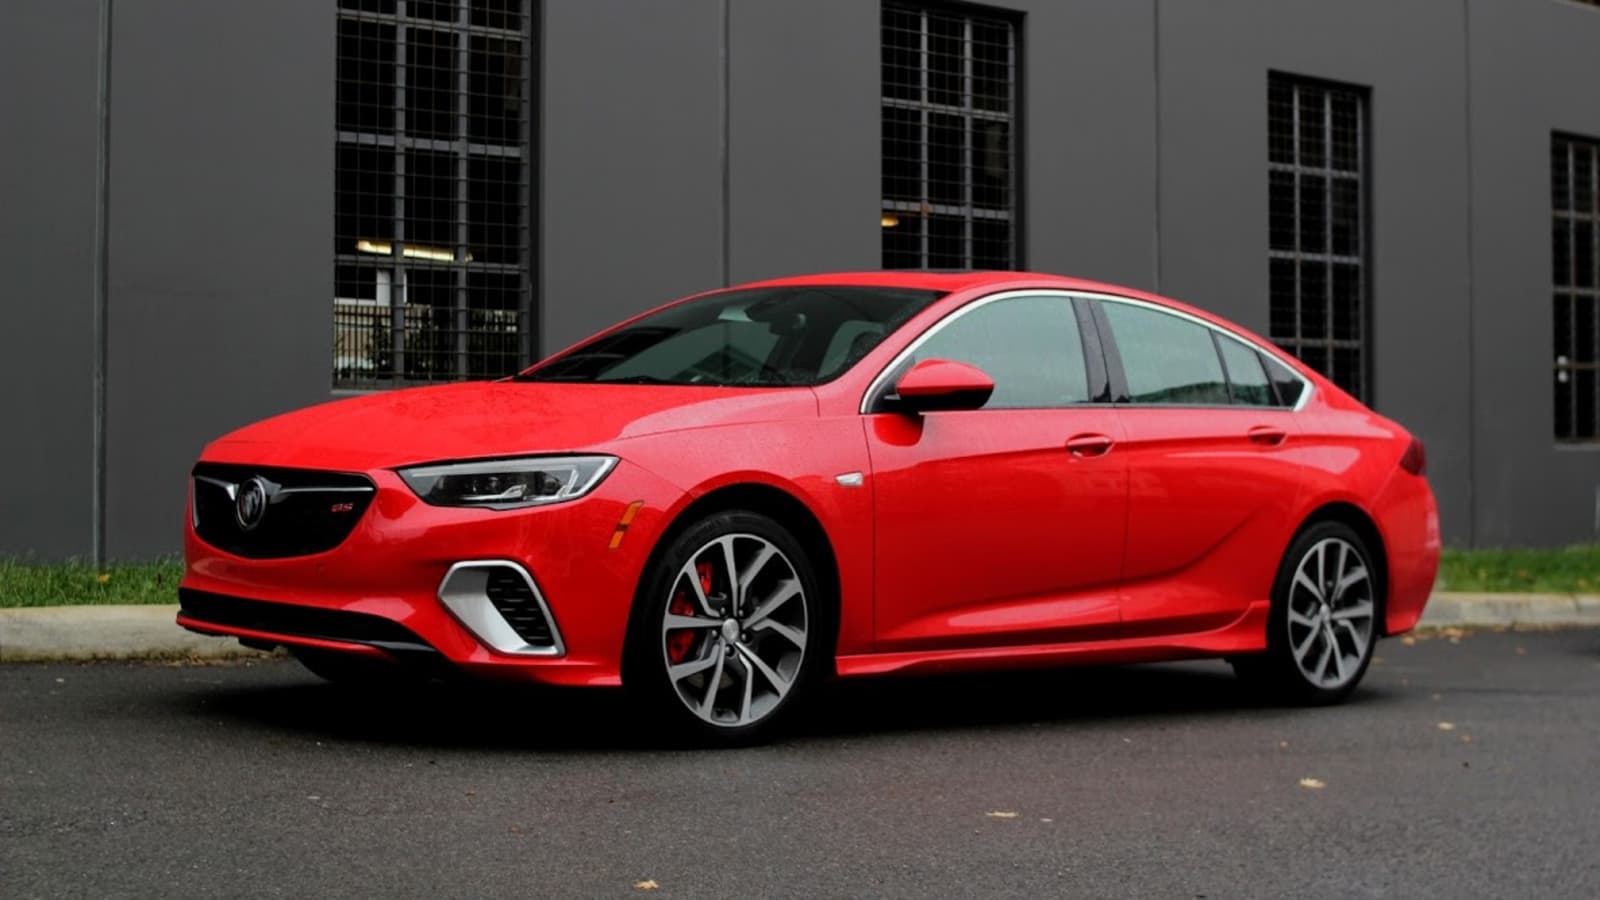 Buick Regal Gs Wallpapers